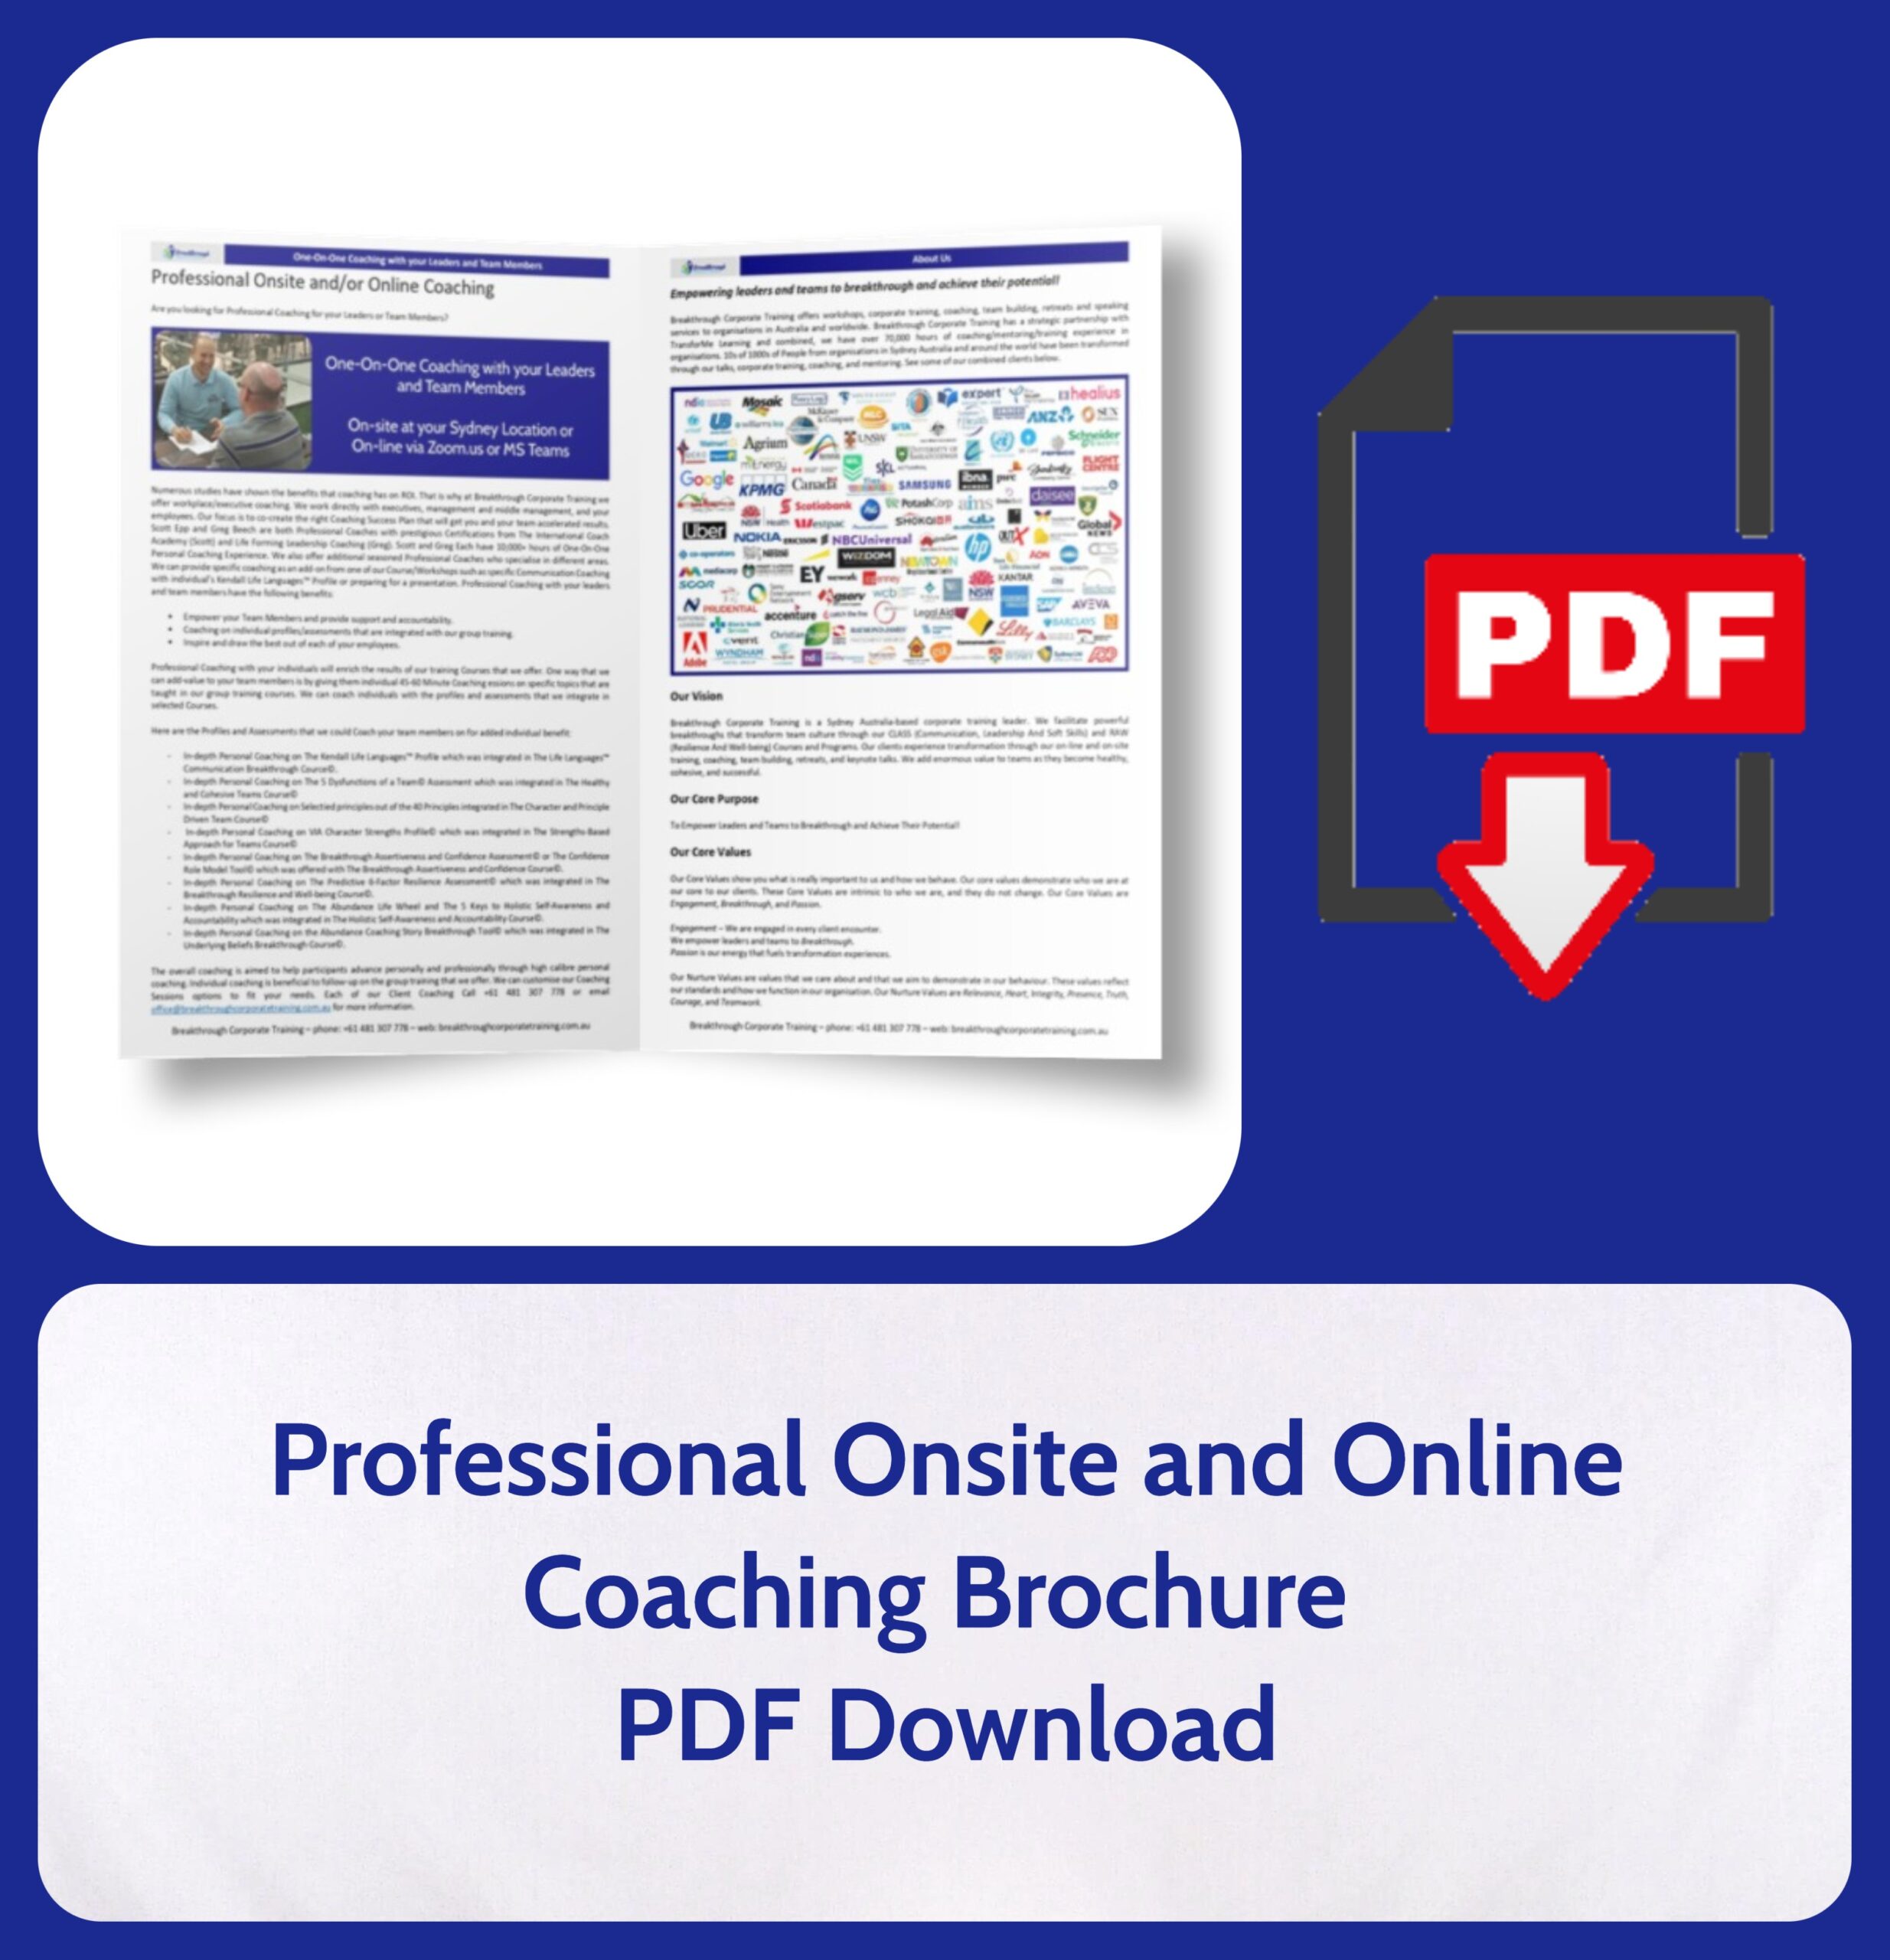 Professional Onsite and Online Coaching Brochure